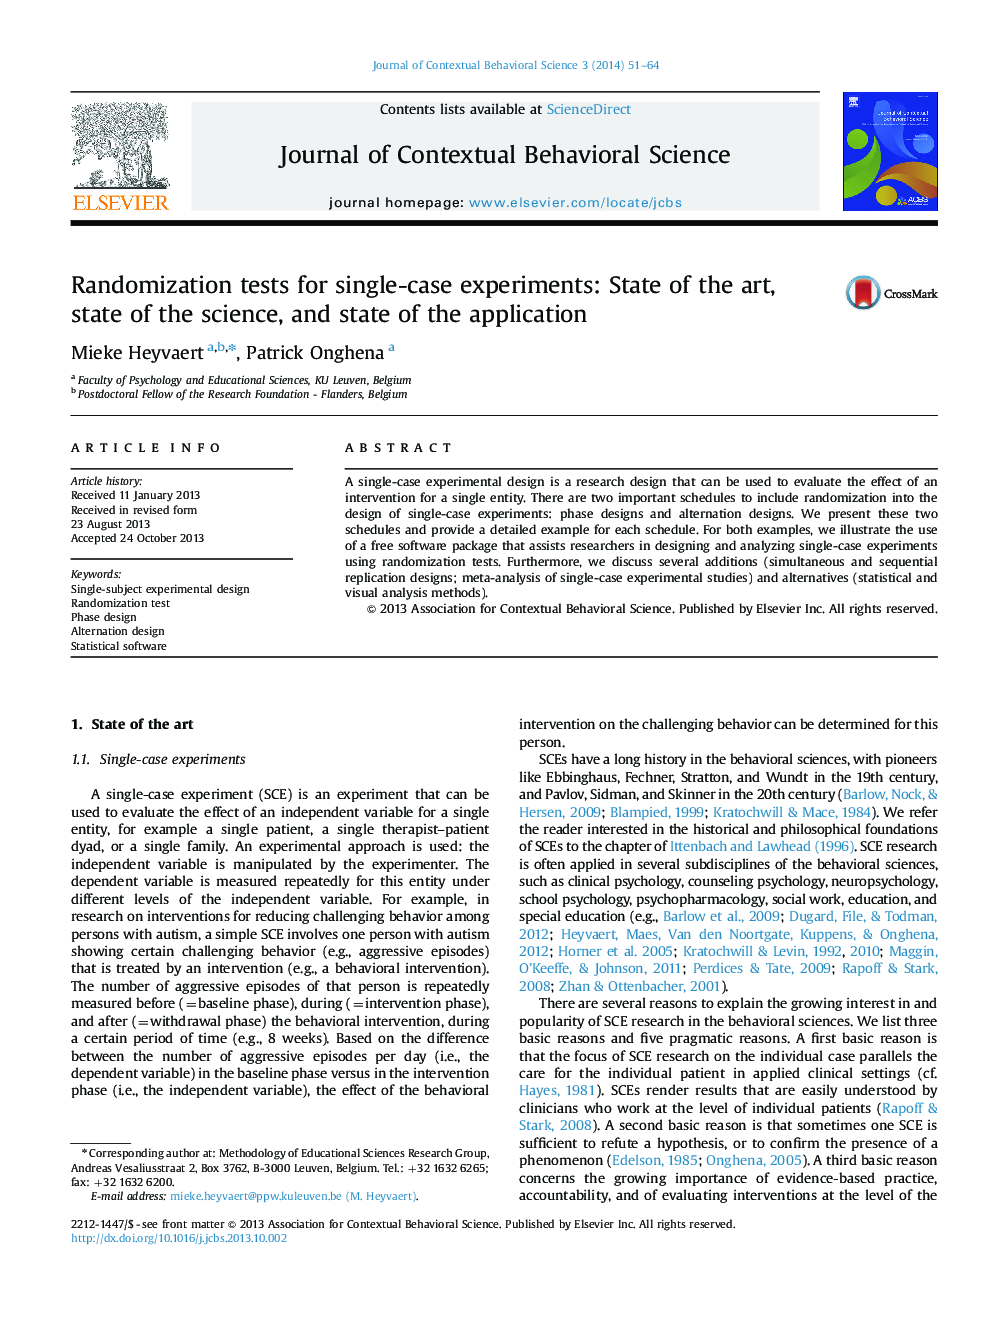 Randomization tests for single-case experiments: State of the art, state of the science, and state of the application